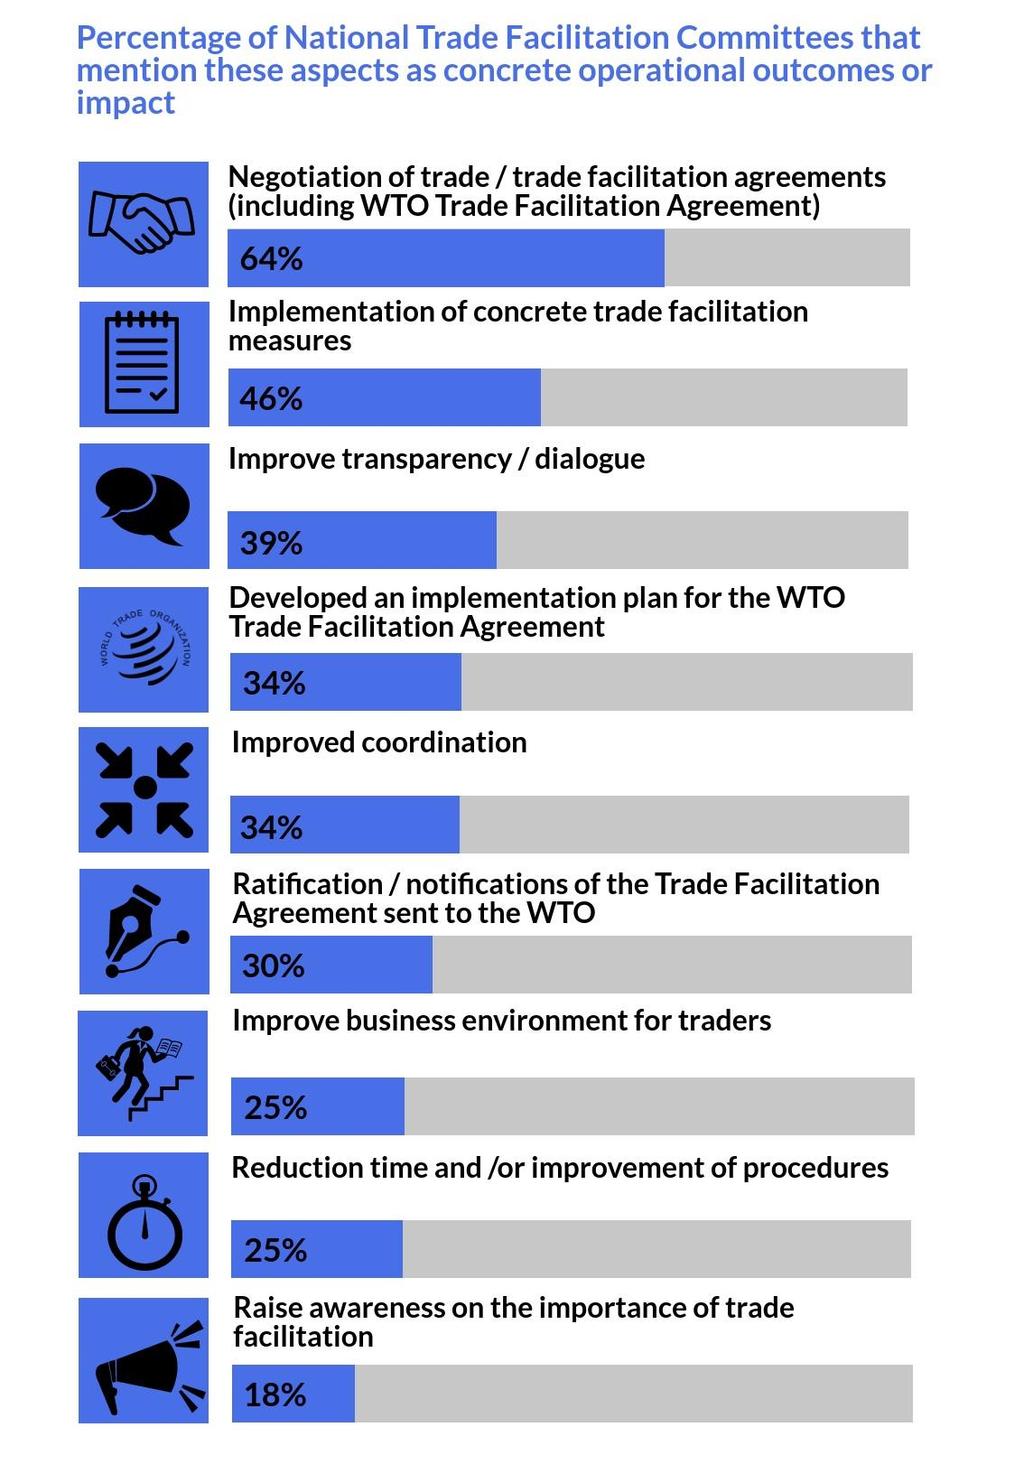 Figure 32: Concrete operational outcomes or impact Source: UNCTAD, based on data from the online